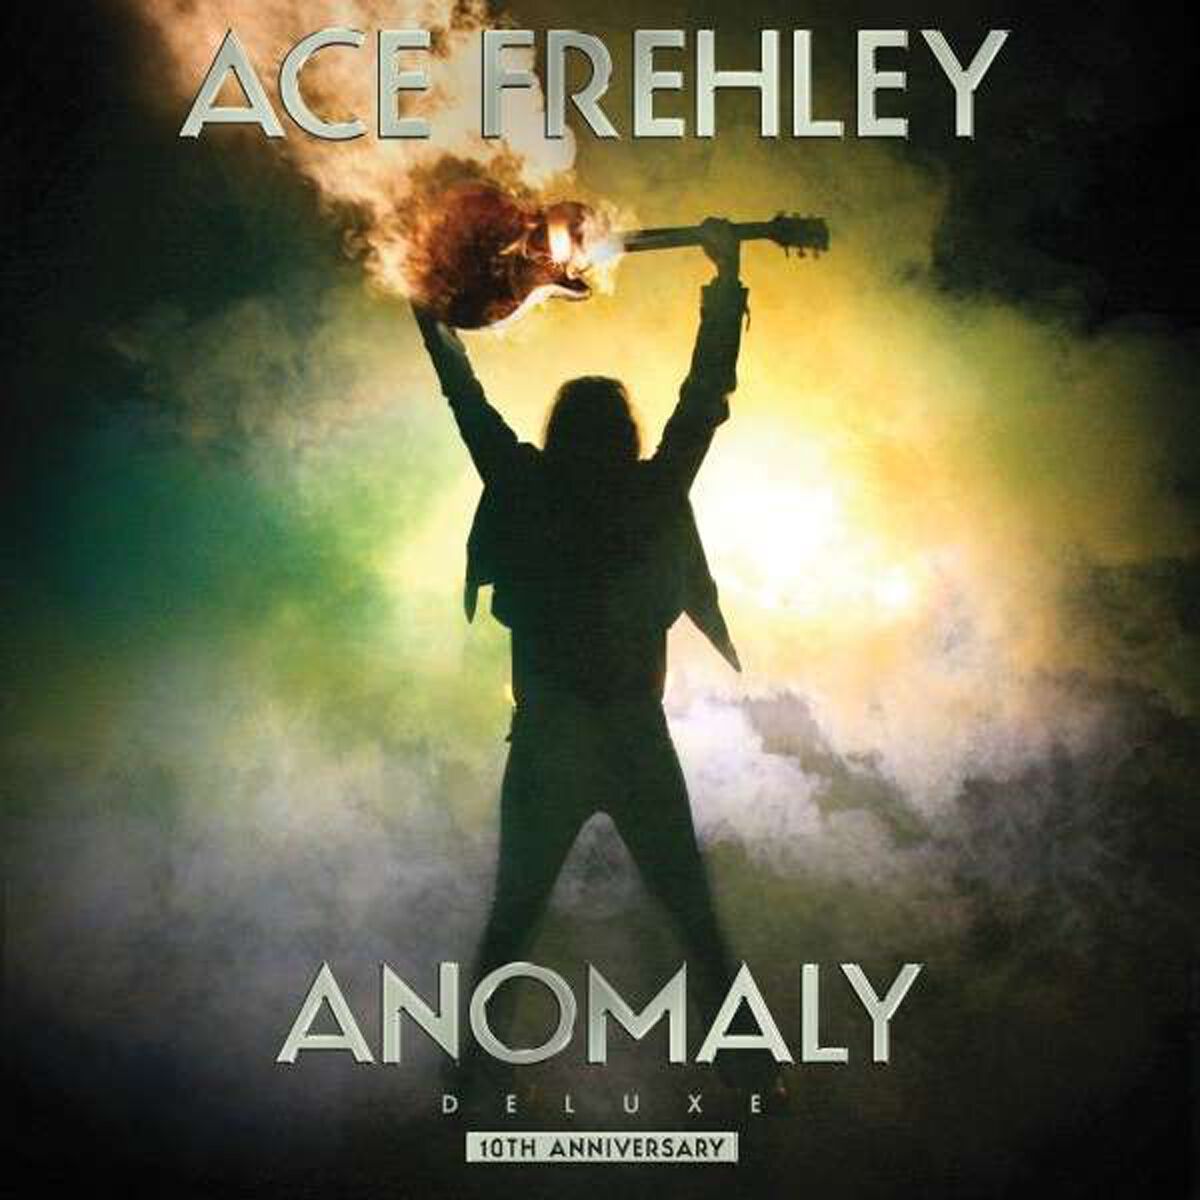 Levně Ace Frehley Anomaly - Deluxe 10th Anniversary 2-LP standard